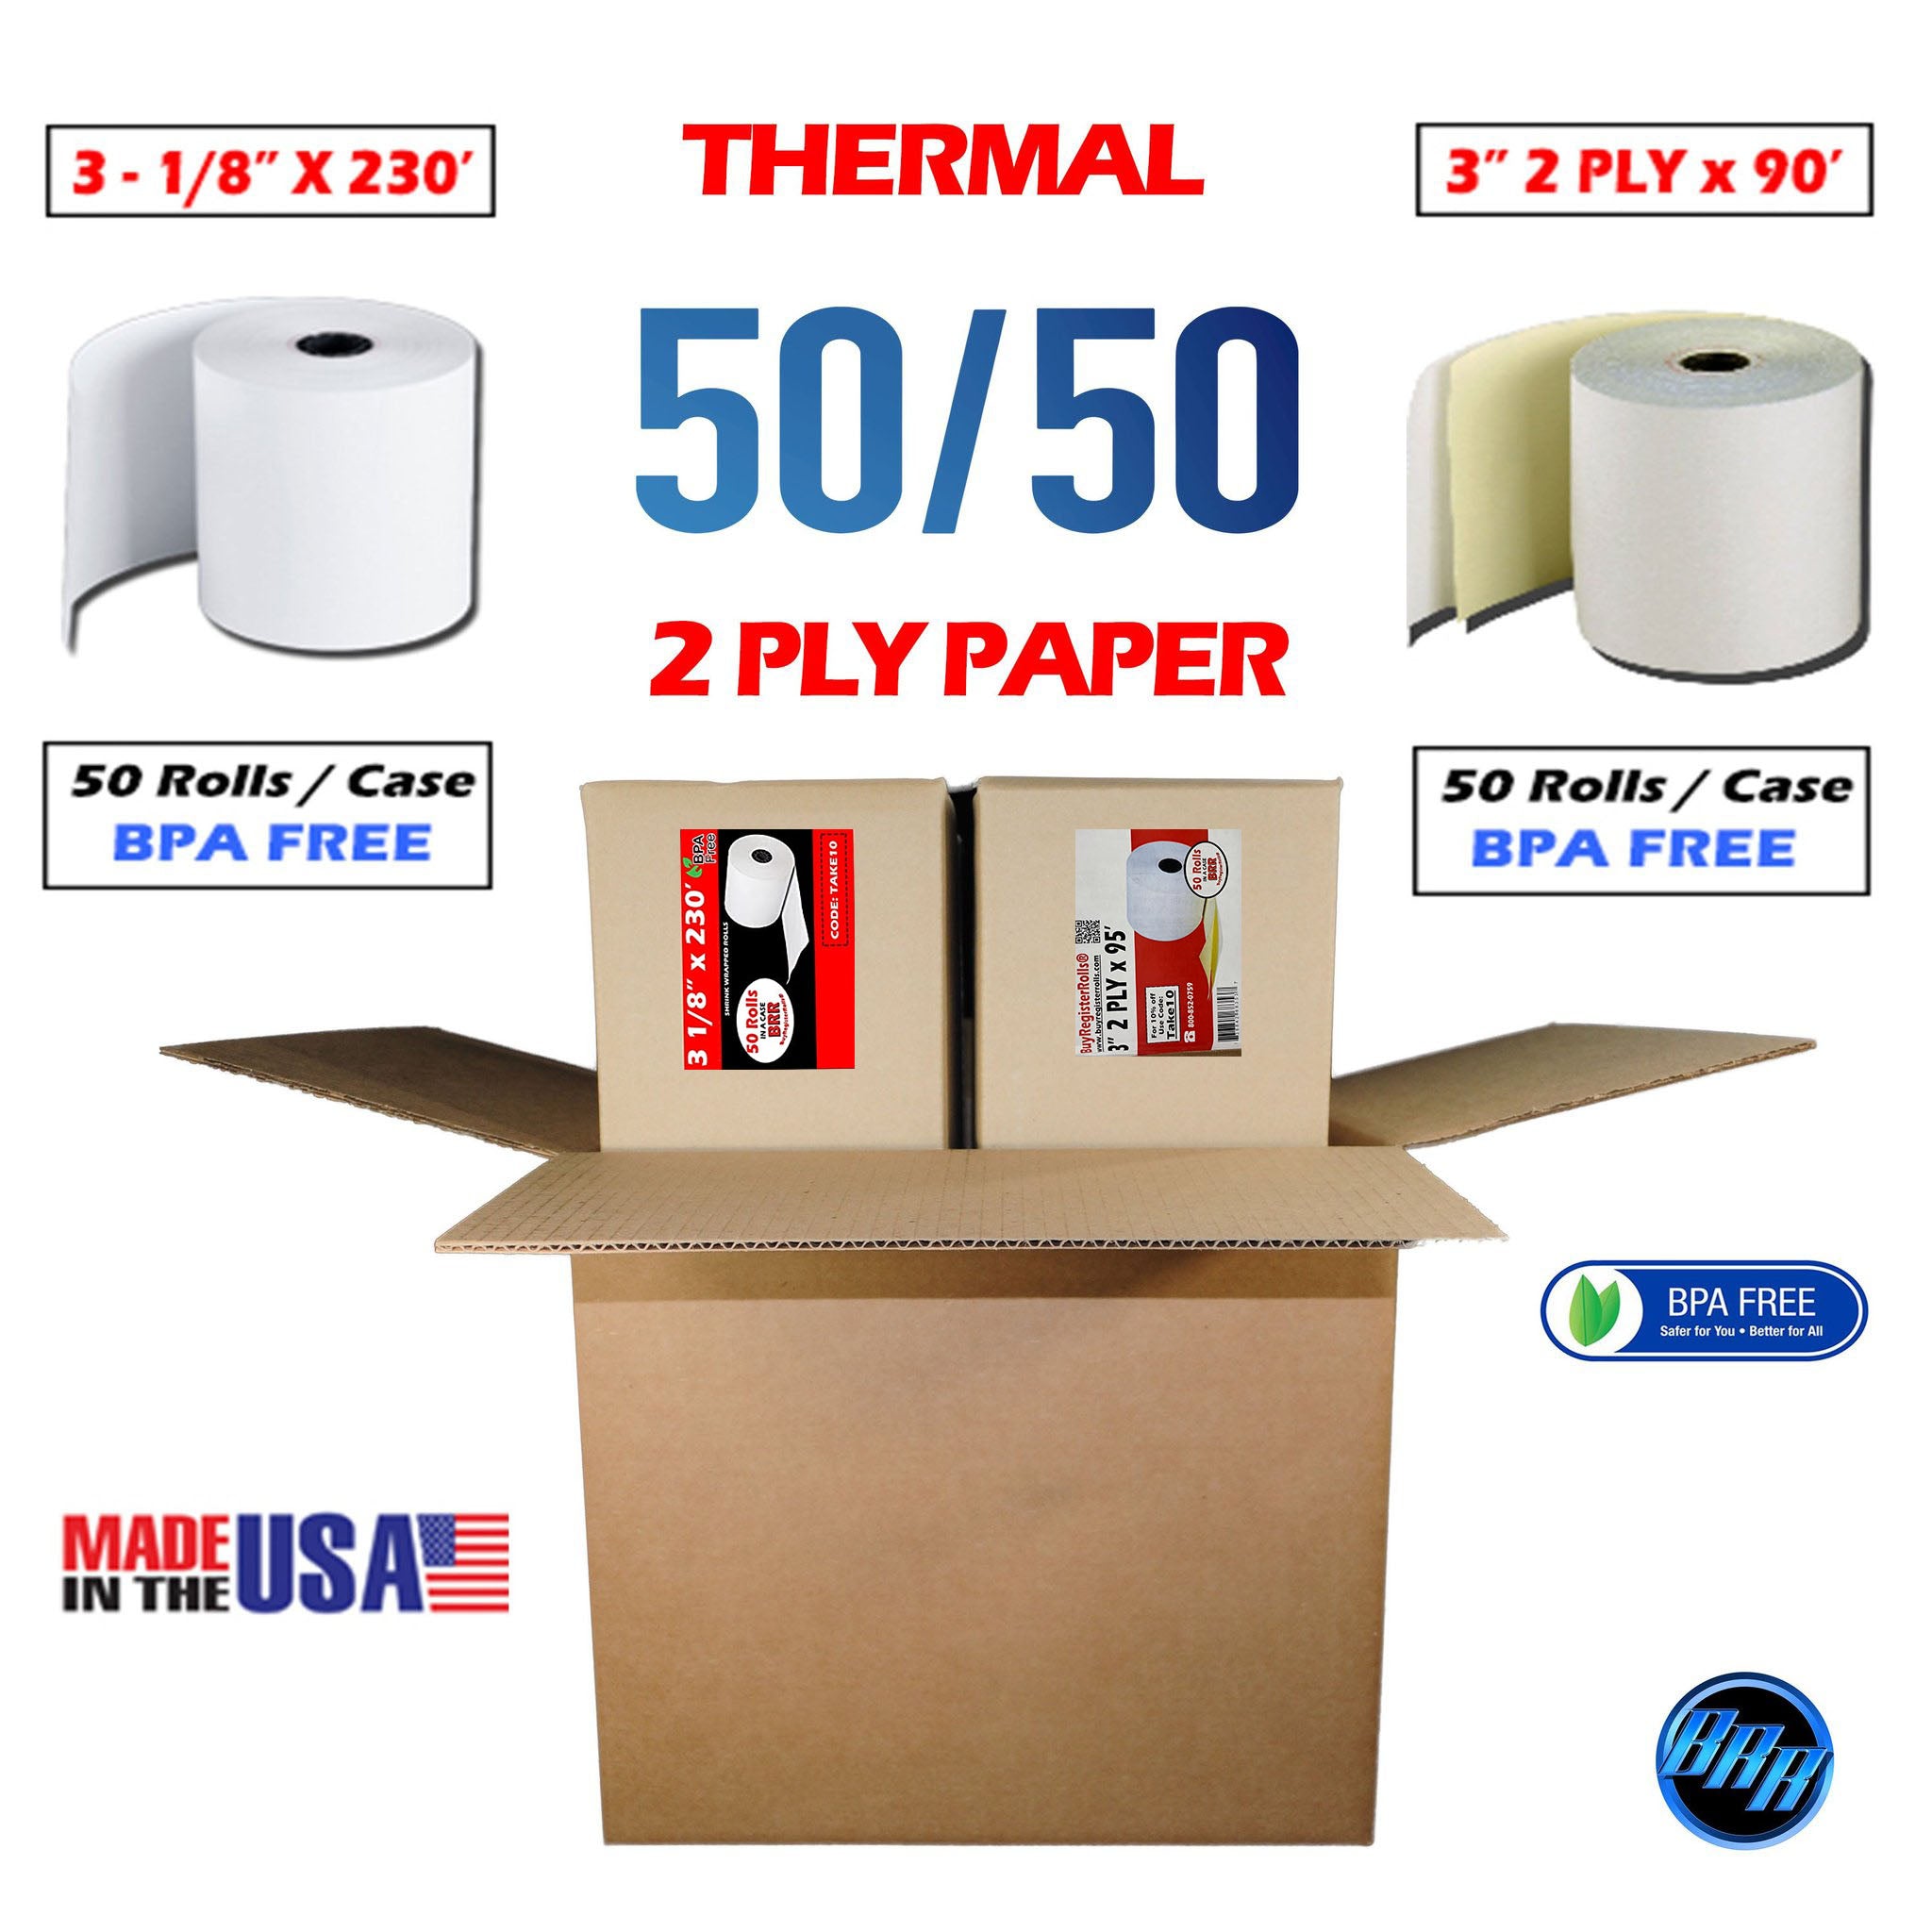 thermal paper rolls 2 1/4 x 55 (58mm) - Phenol Free at Lowest Price!